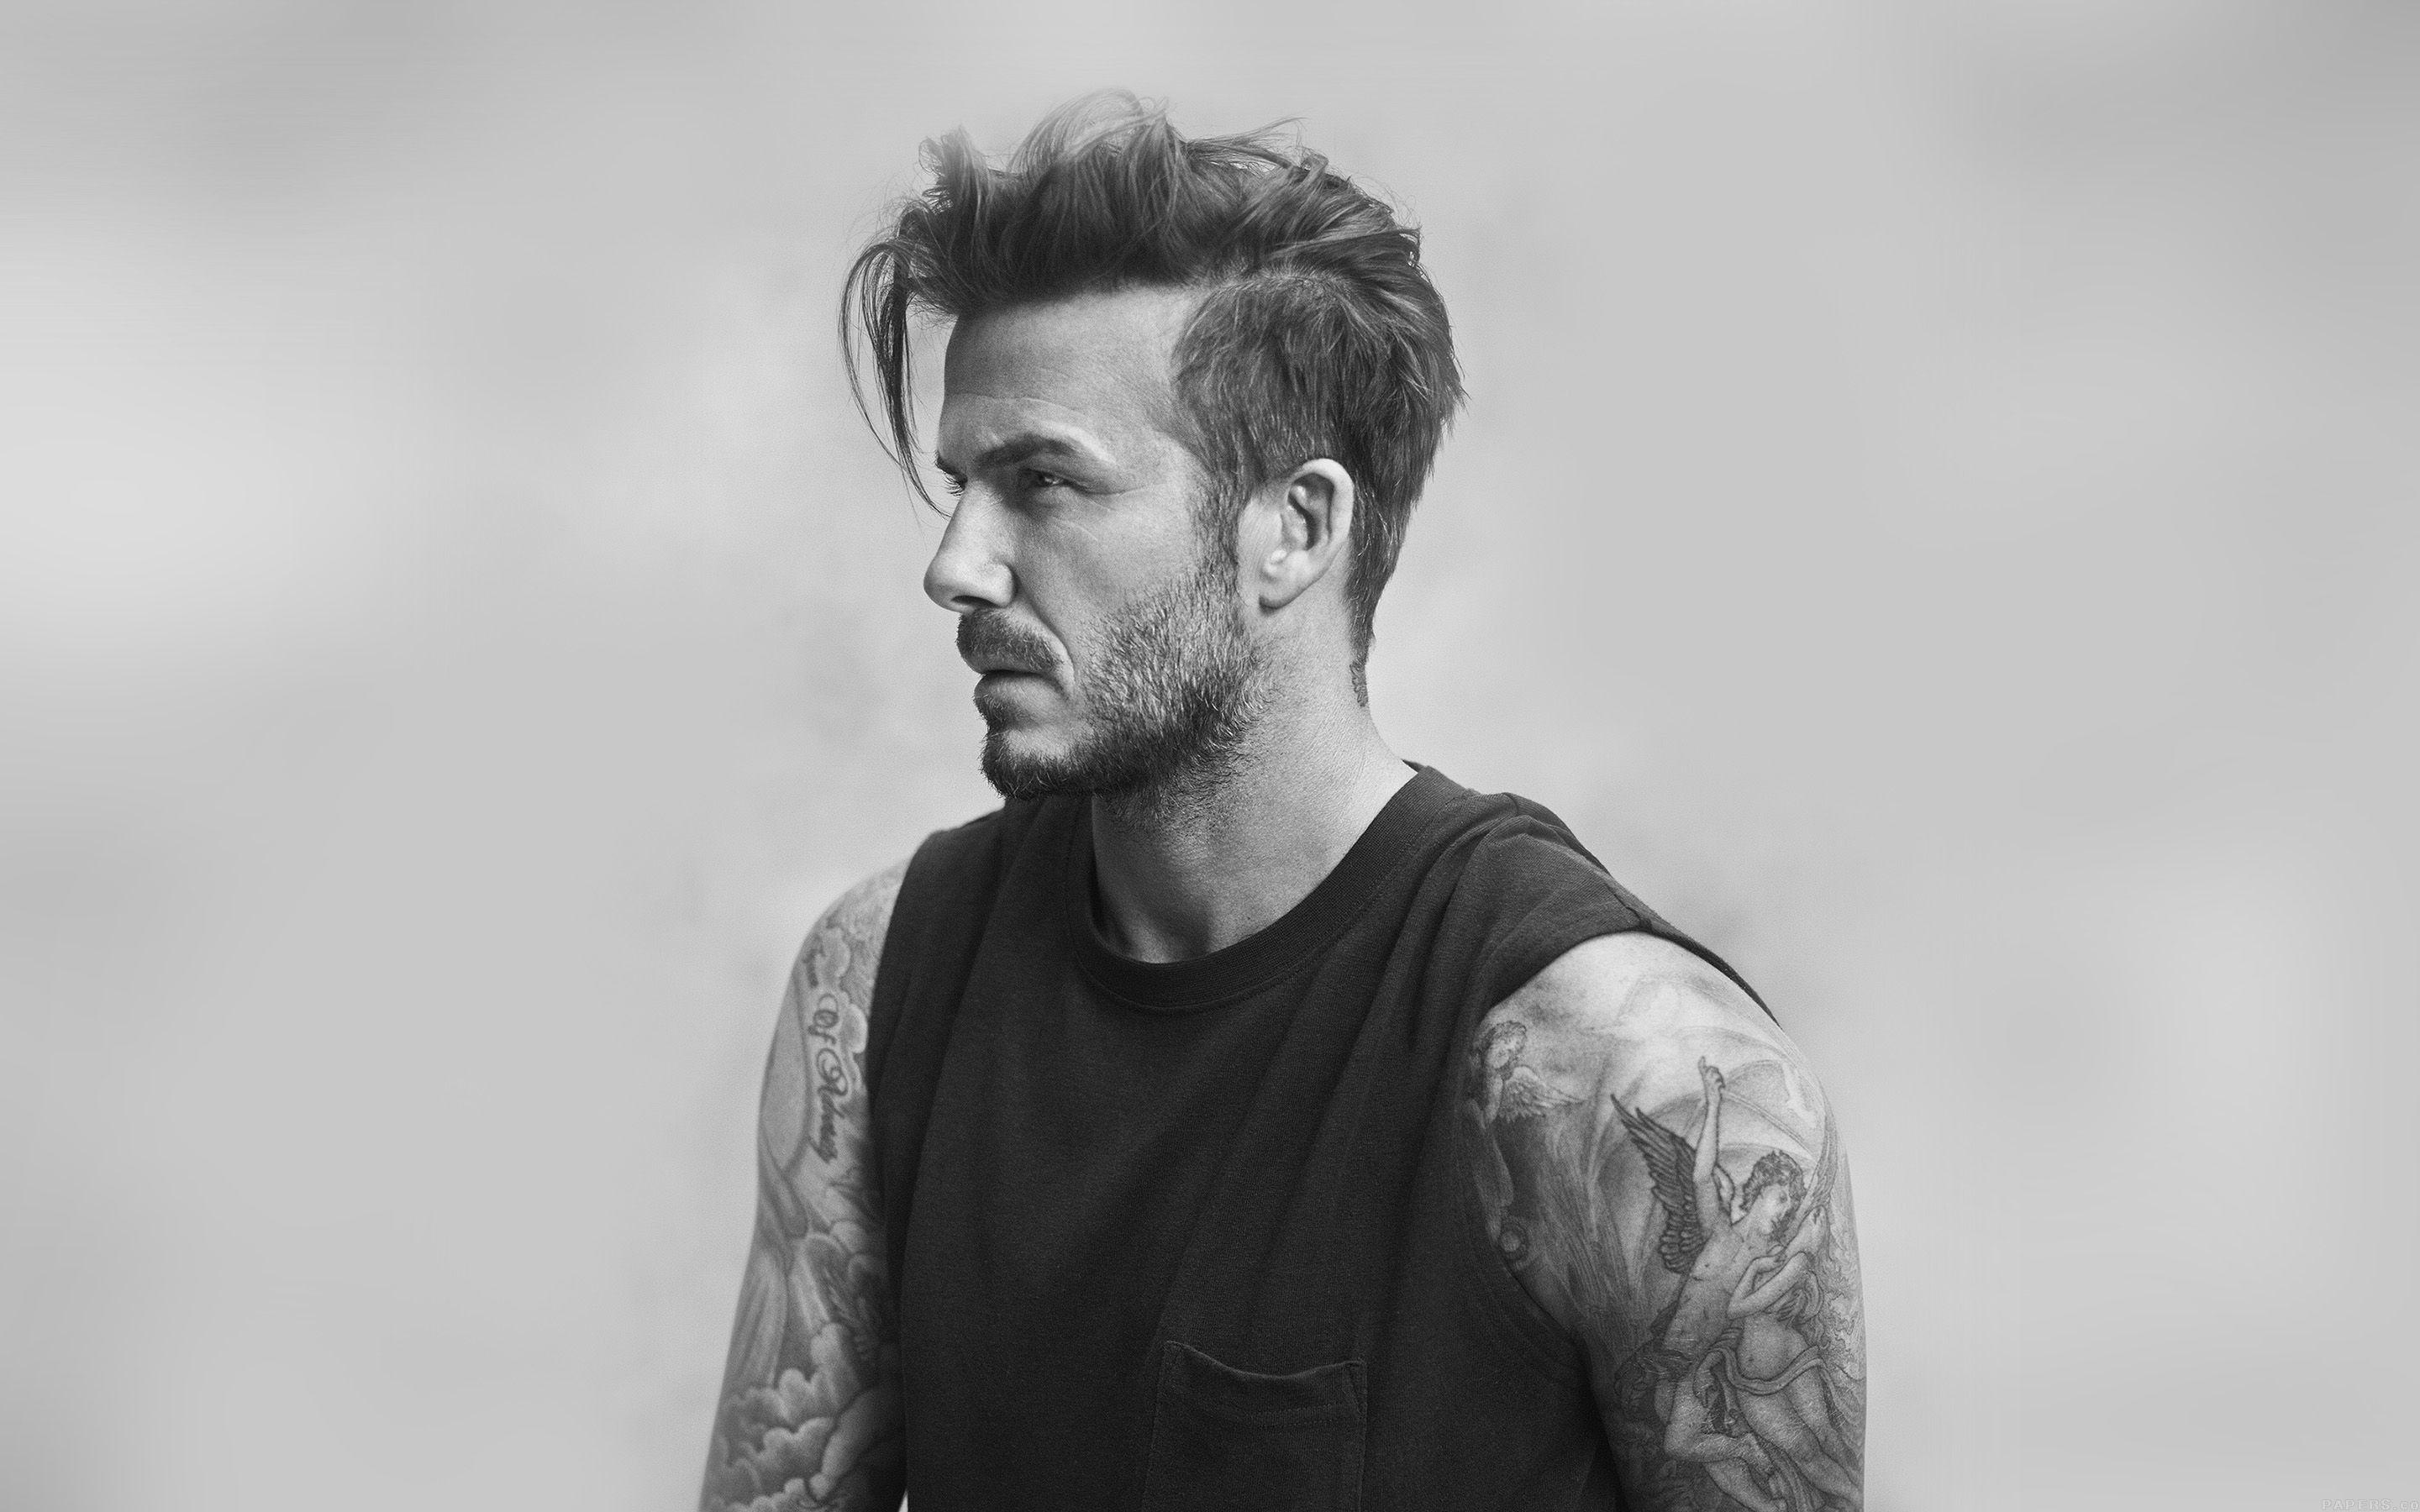 David Beckham Wallpapers HD 4K APK for Android Download